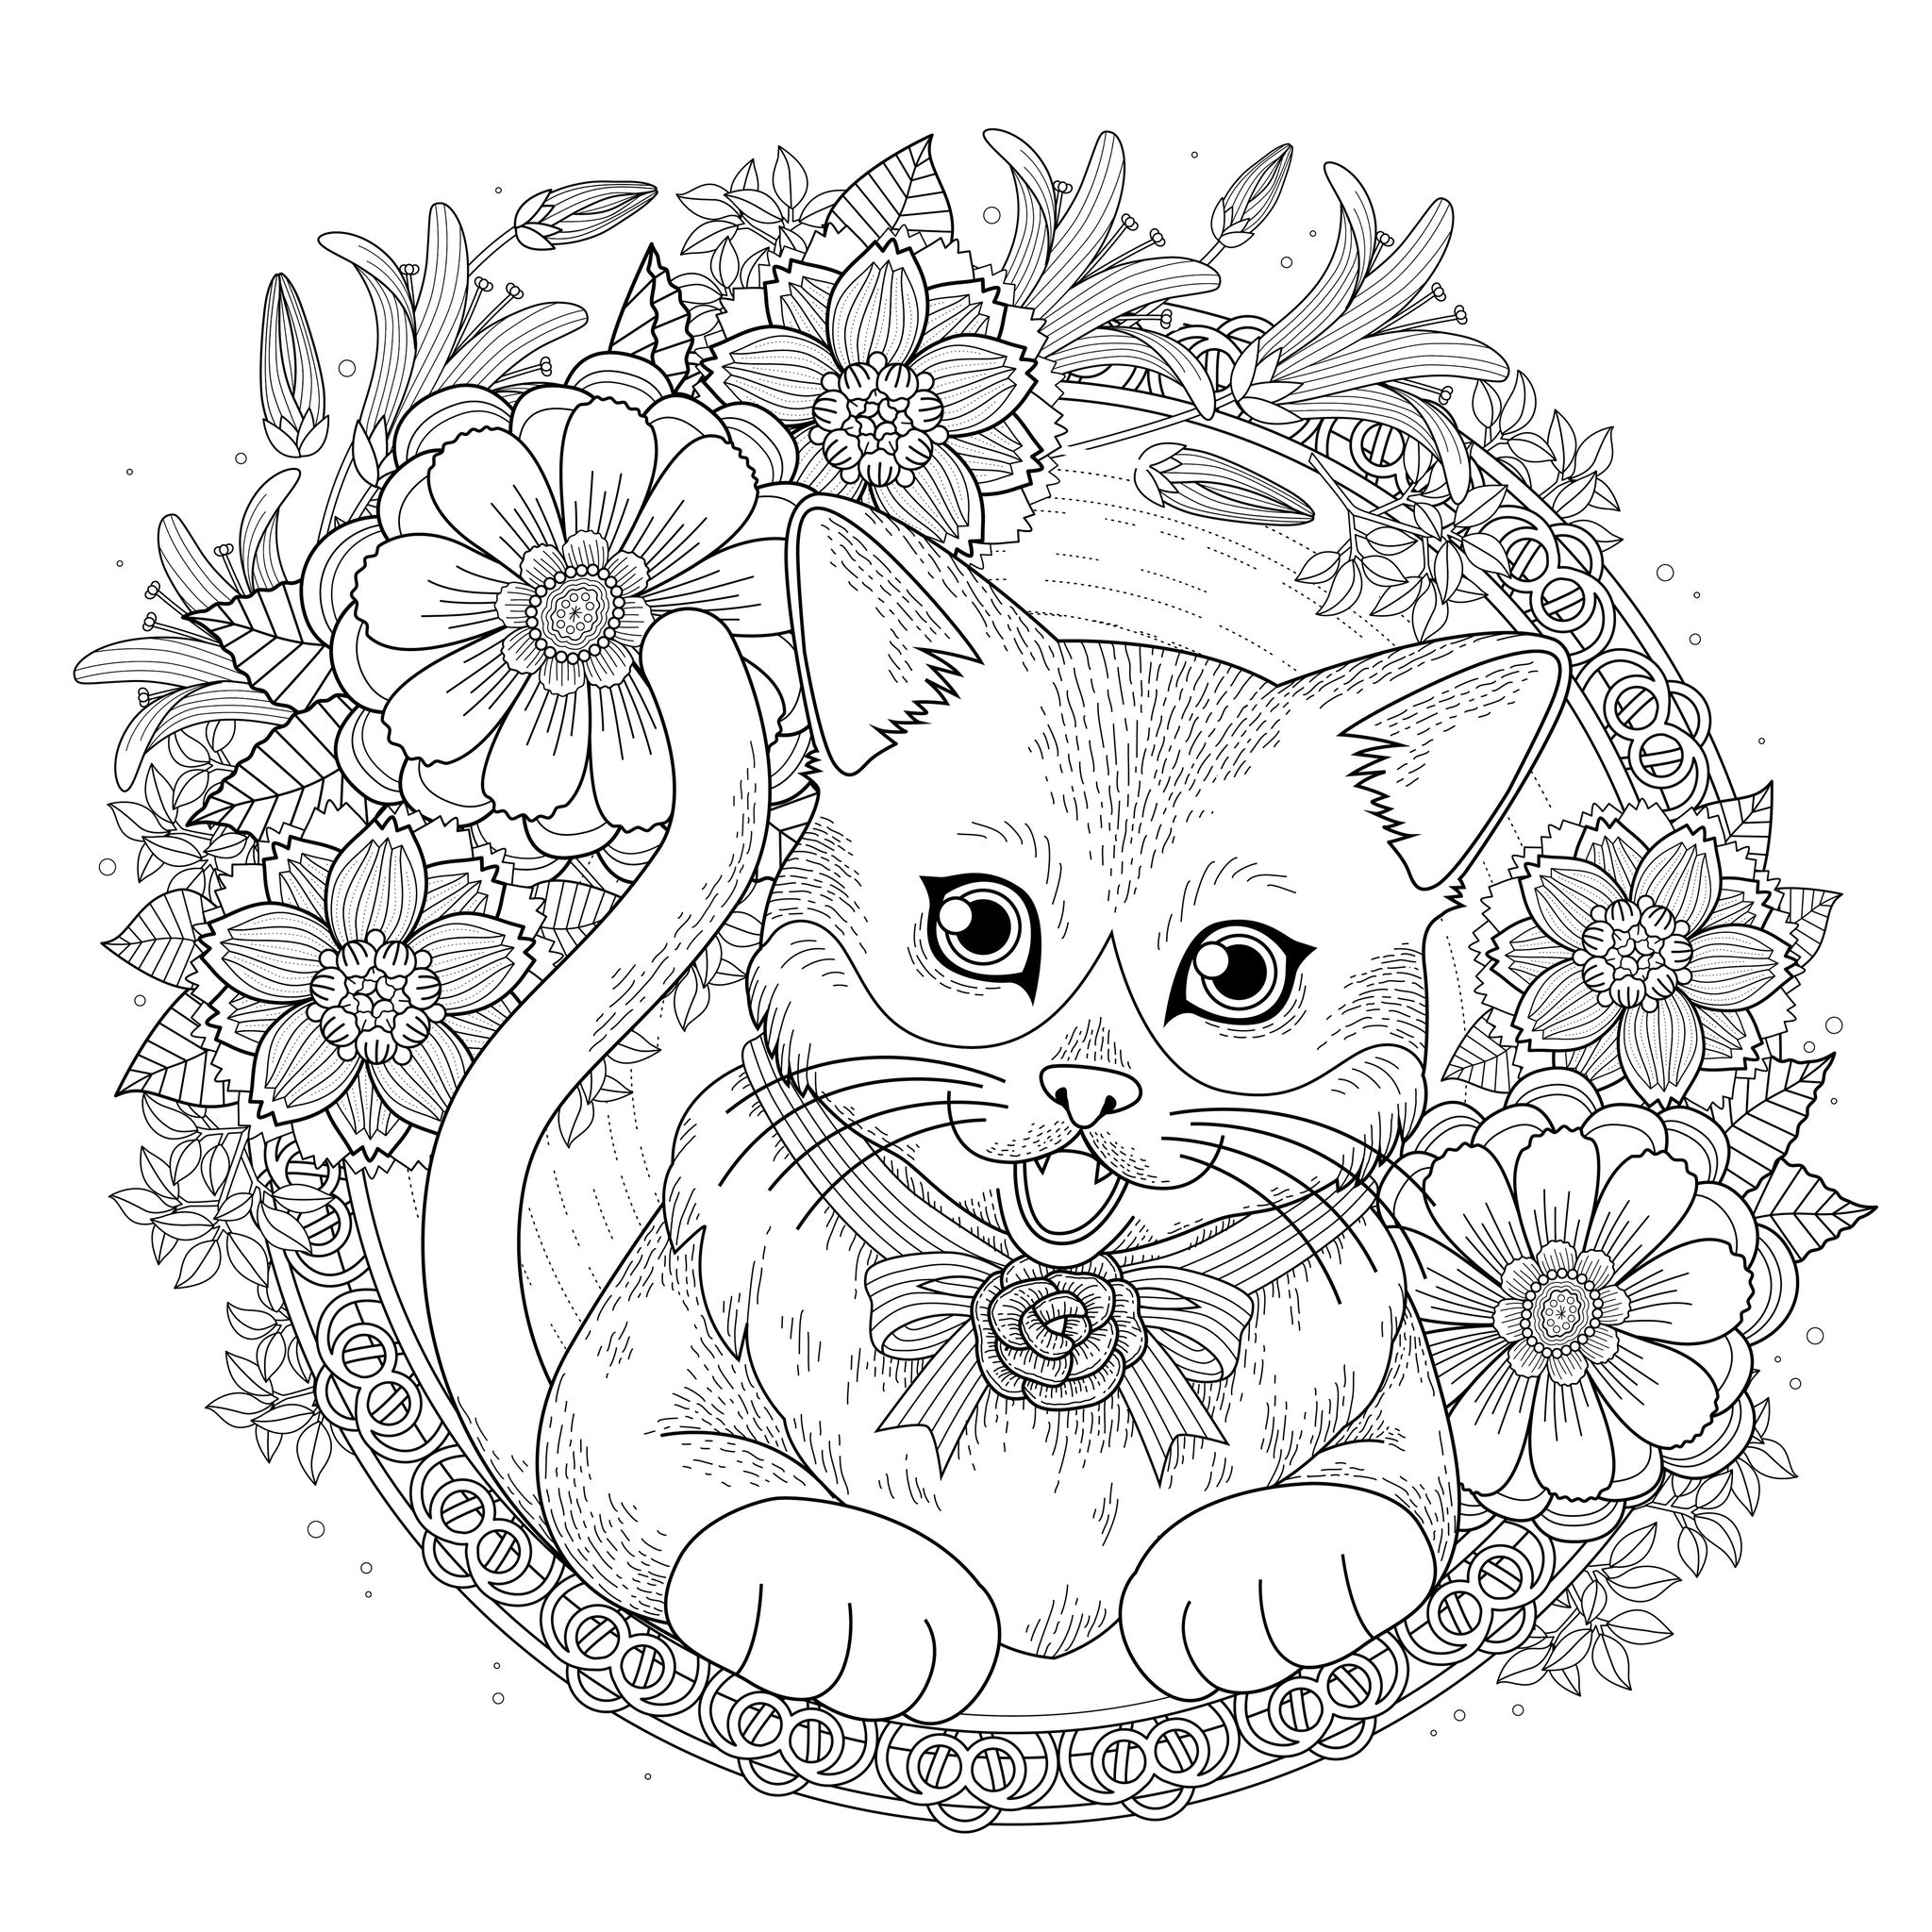 Adorable kitty coloring page Cats Adult Coloring Pages